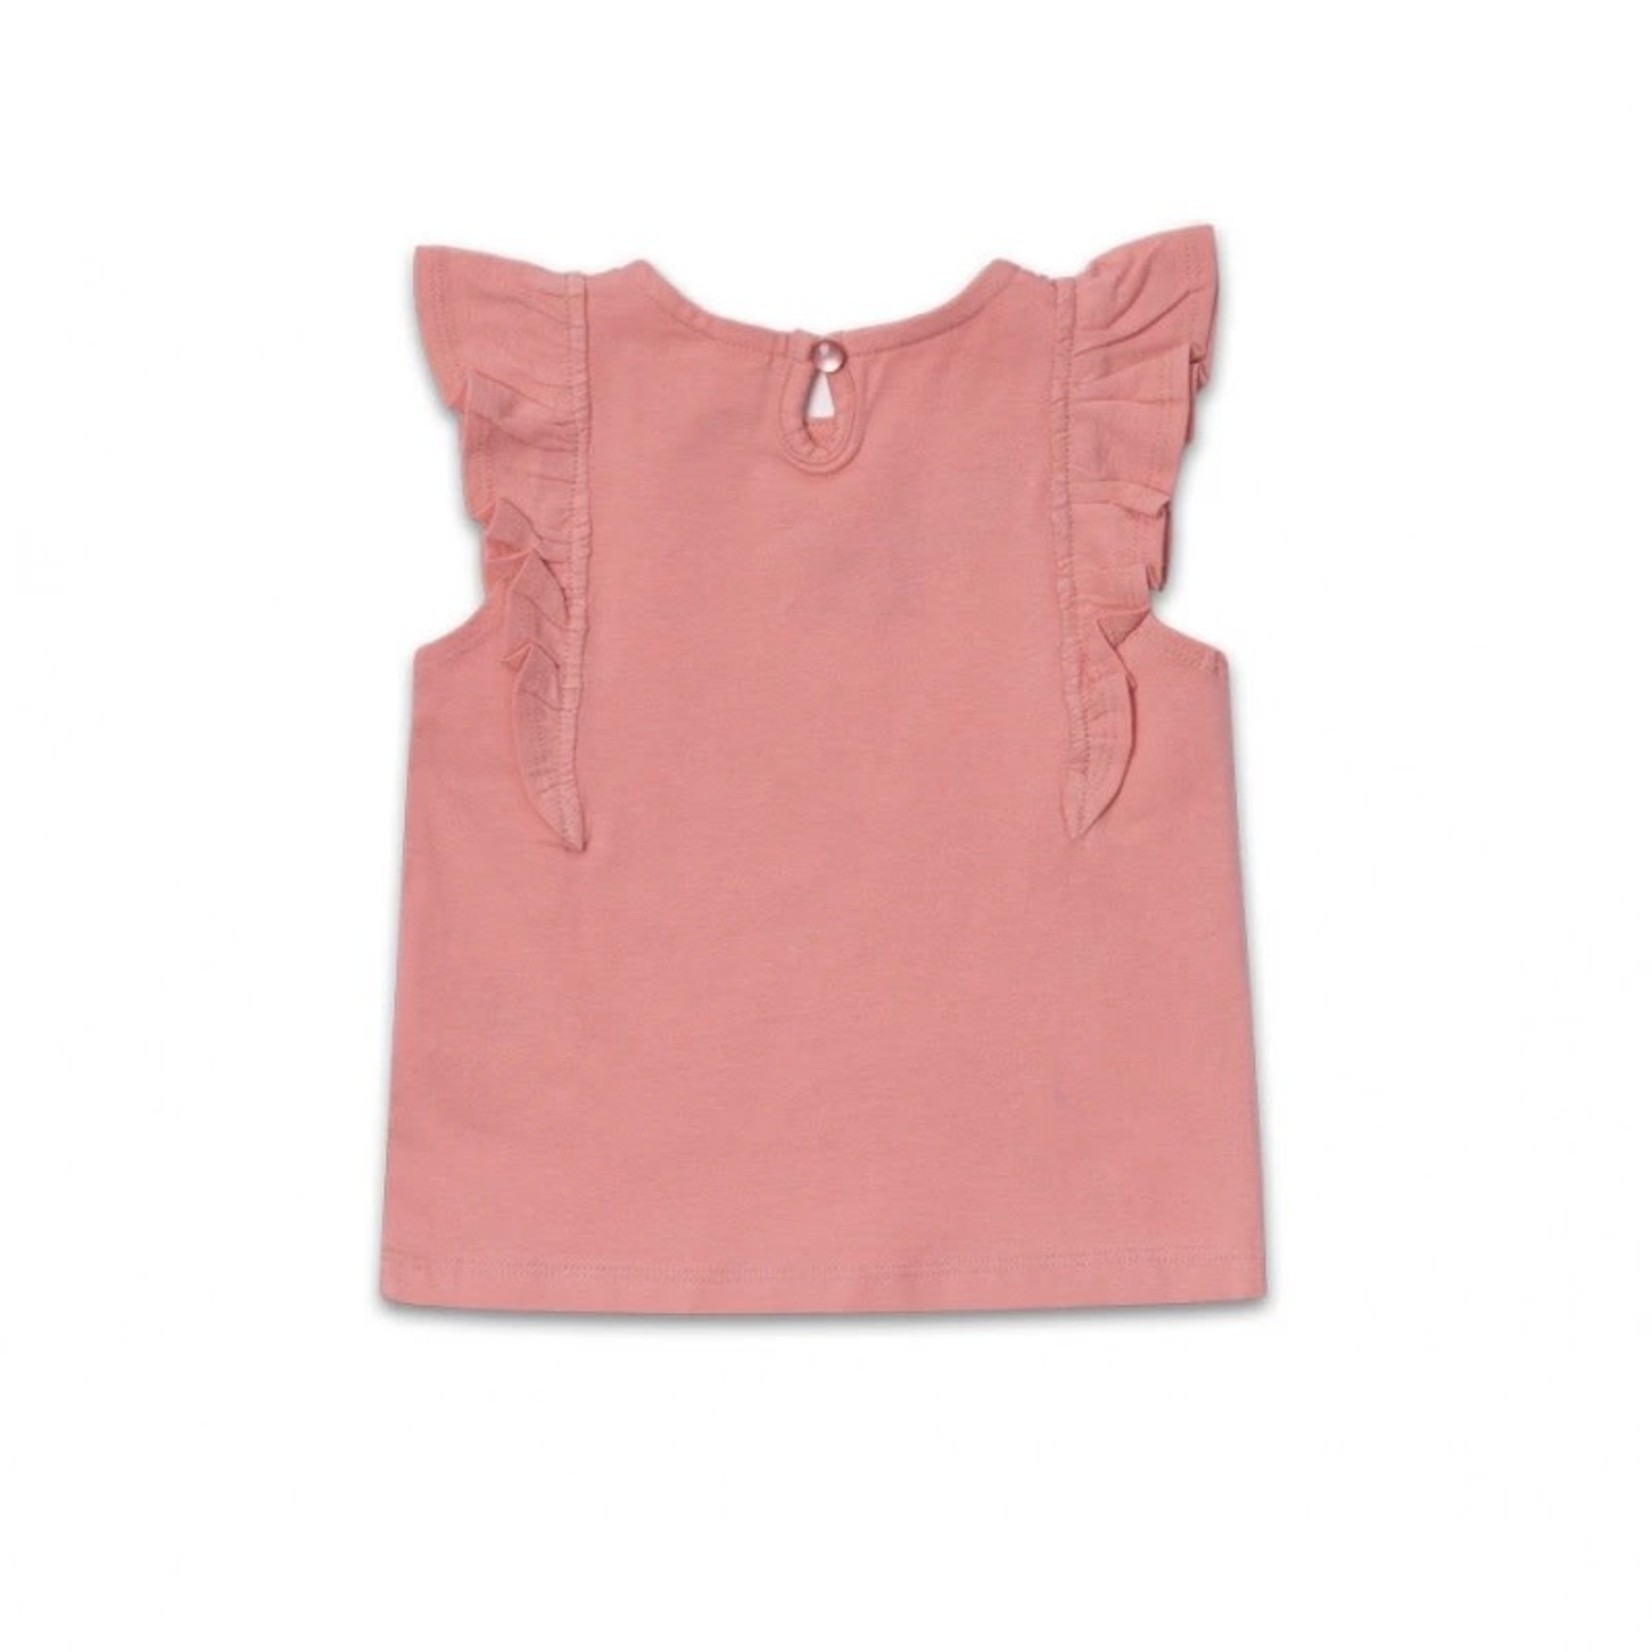 TucTuc TUC TUC - Coral Tank Top with Ruffles on the Shoulders and Flower Embroidery 'Treasure Island'